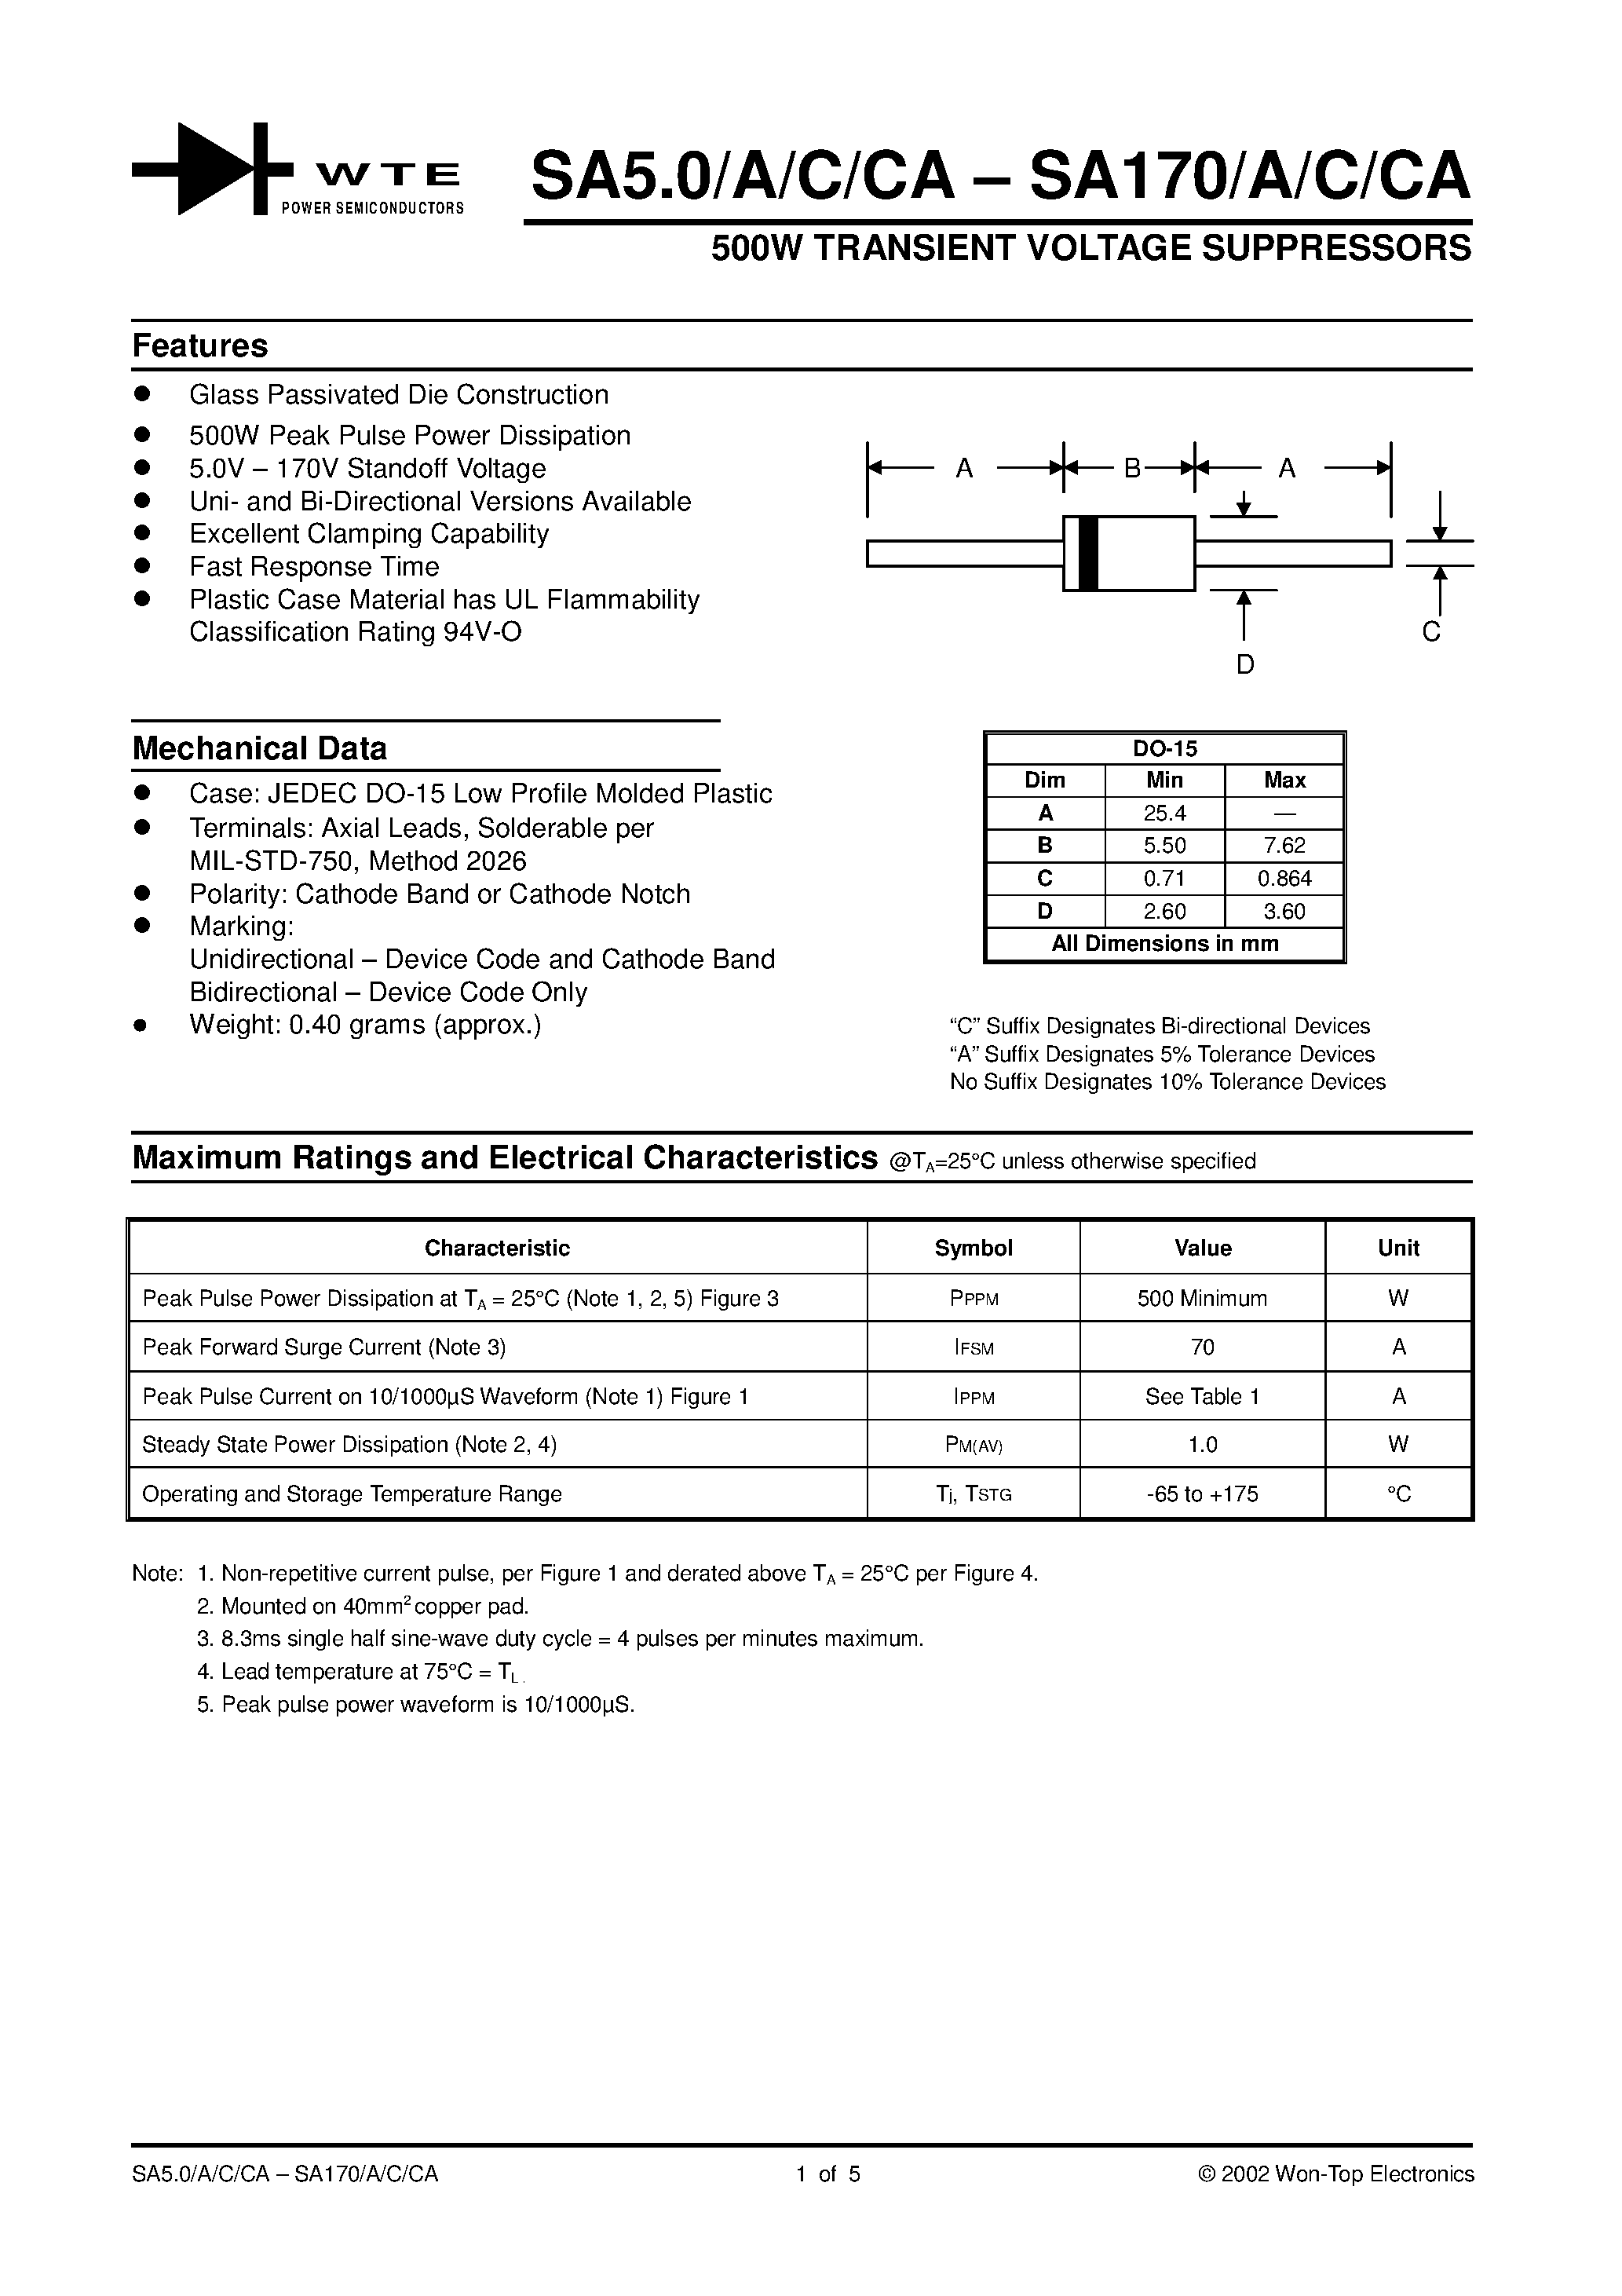 Datasheet SA36A - 500W TRANSIENT VOLTAGE SUPPRESSORS page 1